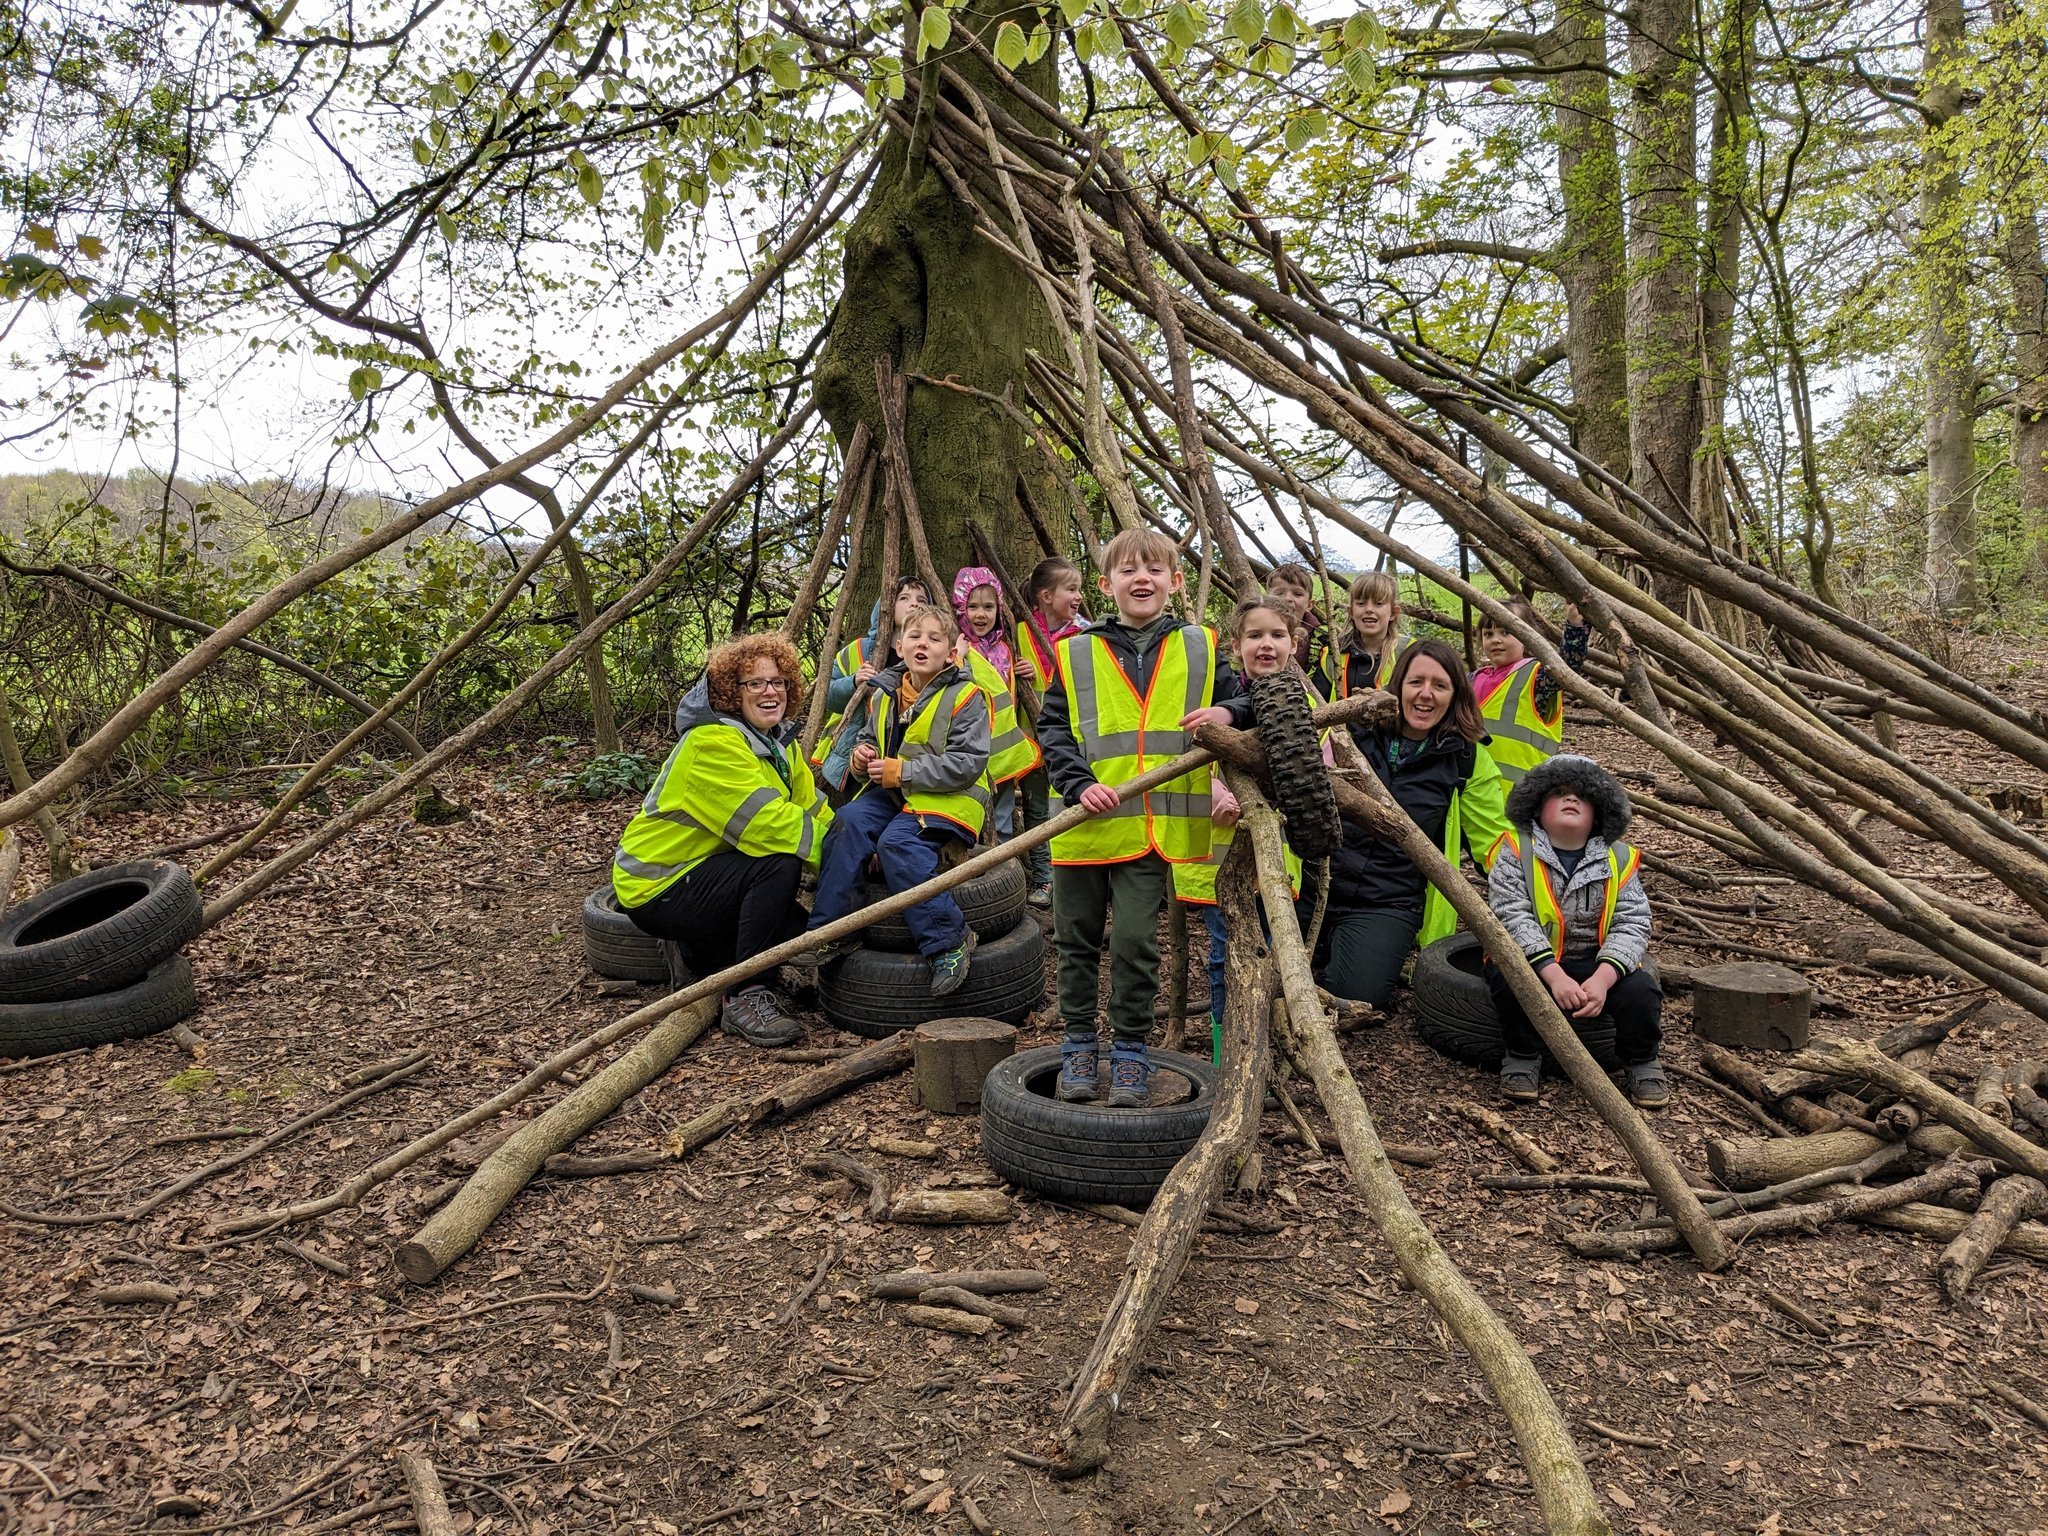 Saxton Primary had a blast at Ledston. They loved testing their tree knowledge, but most of all they enjoyed shelter building in the woods.🌳🐿

 #outdooreducation #primaryeducation #countryside #nature #getoutdoors #schooltrip